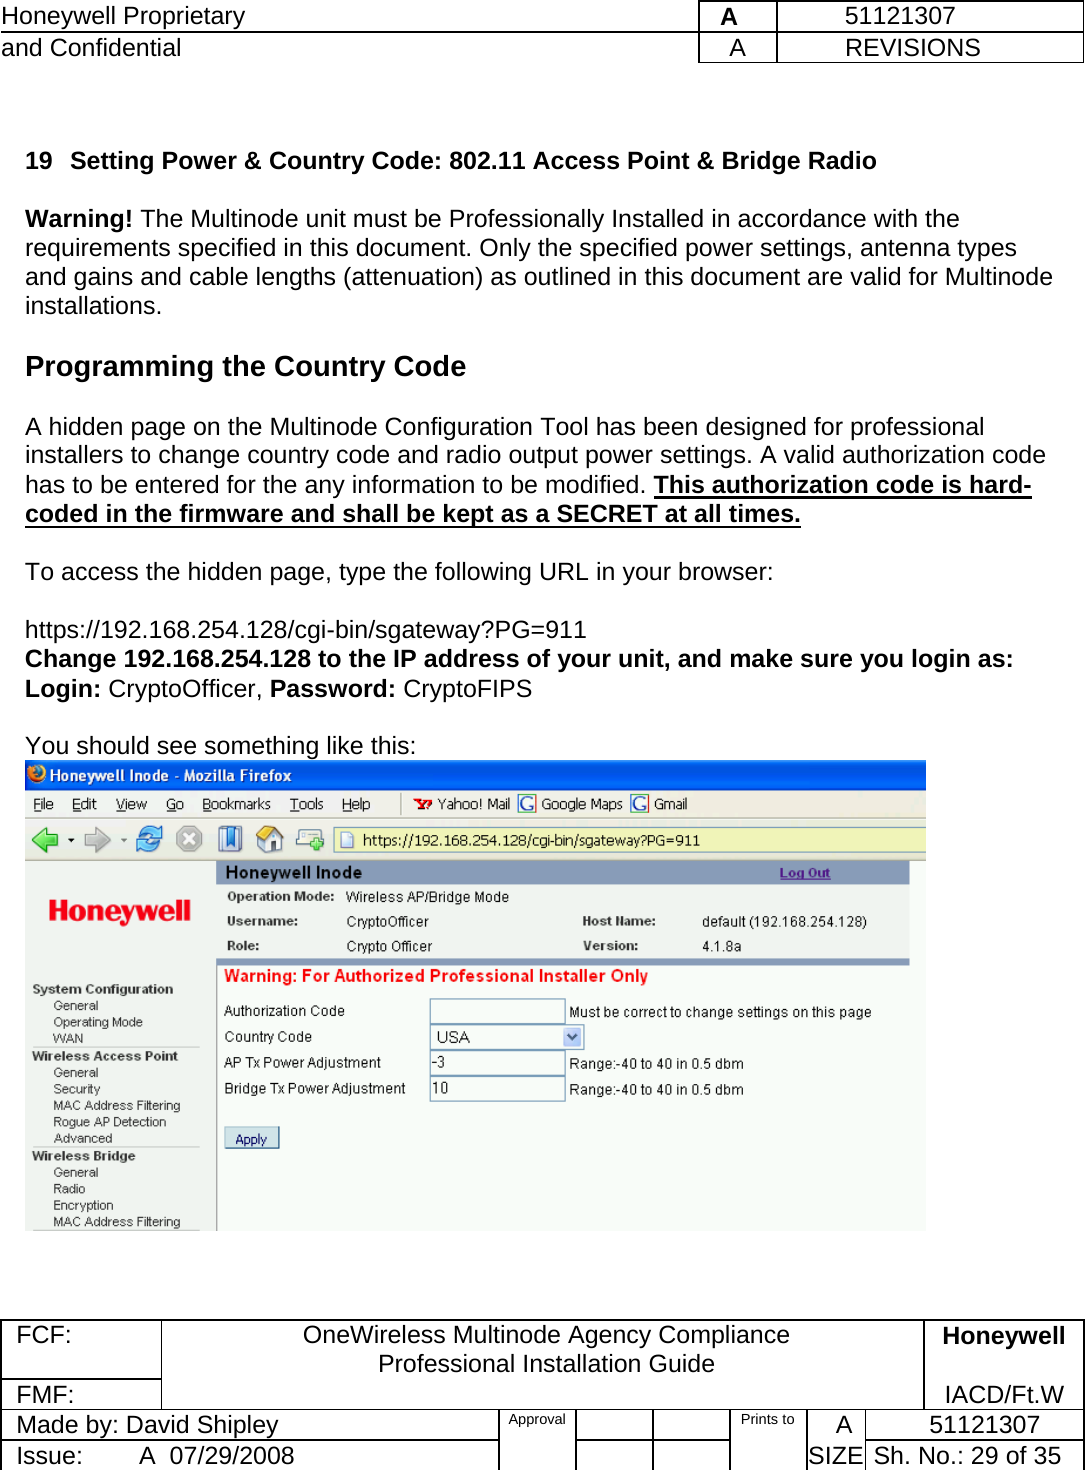 Honeywell Proprietary    A         51121307 and Confidential  A           REVISIONS  FCF:  OneWireless Multinode Agency Compliance Professional Installation Guide  Honeywell FMF:               IACD/Ft.W Made by: David Shipley  Approval   Prints to     A           51121307 Issue:        A  07/29/2008          SIZE  Sh. No.: 29 of 35   19  Setting Power &amp; Country Code: 802.11 Access Point &amp; Bridge Radio  Warning! The Multinode unit must be Professionally Installed in accordance with the requirements specified in this document. Only the specified power settings, antenna types and gains and cable lengths (attenuation) as outlined in this document are valid for Multinode installations.   Programming the Country Code  A hidden page on the Multinode Configuration Tool has been designed for professional installers to change country code and radio output power settings. A valid authorization code has to be entered for the any information to be modified. This authorization code is hard-coded in the firmware and shall be kept as a SECRET at all times.  To access the hidden page, type the following URL in your browser:  https://192.168.254.128/cgi-bin/sgateway?PG=911 Change 192.168.254.128 to the IP address of your unit, and make sure you login as:  Login: CryptoOfficer, Password: CryptoFIPS   You should see something like this:    